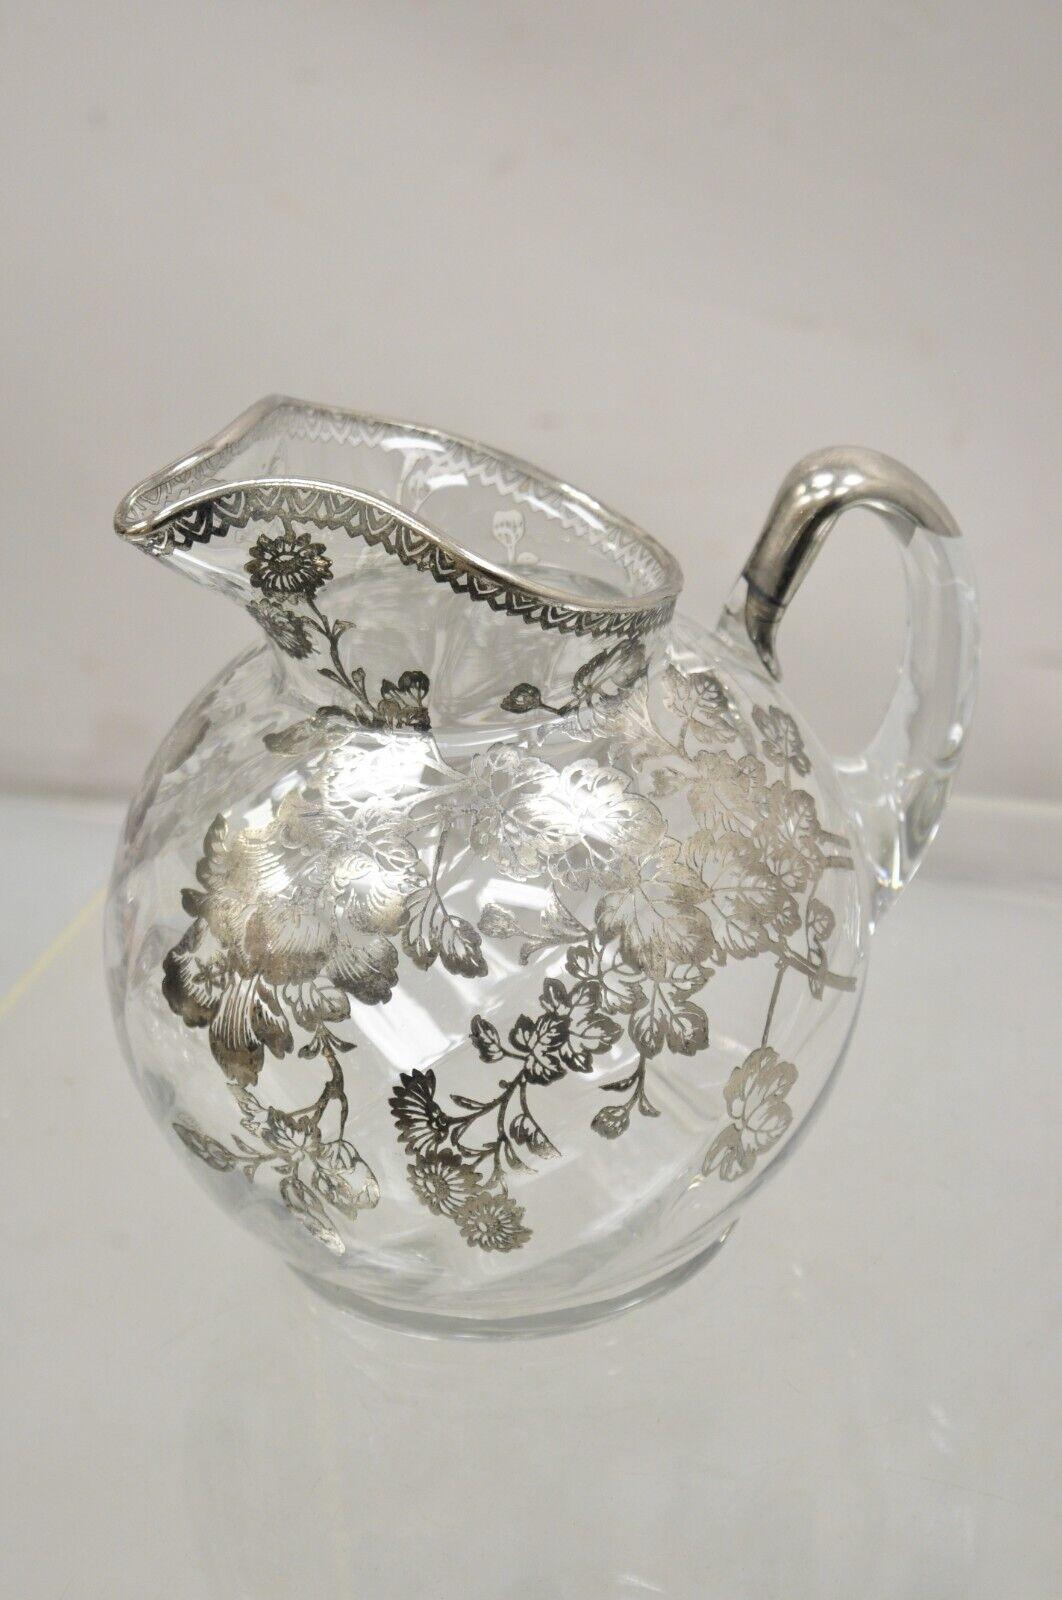 Cambridge Gyro Optic Ball Glass Swirl Water Pitcher w/ Sterling Silver Overlay. Item features swirled blown glass, floral silver overlay, very nice vintage pitcher.. Circa Early to Mid 20th Century. Measurements: 8.5